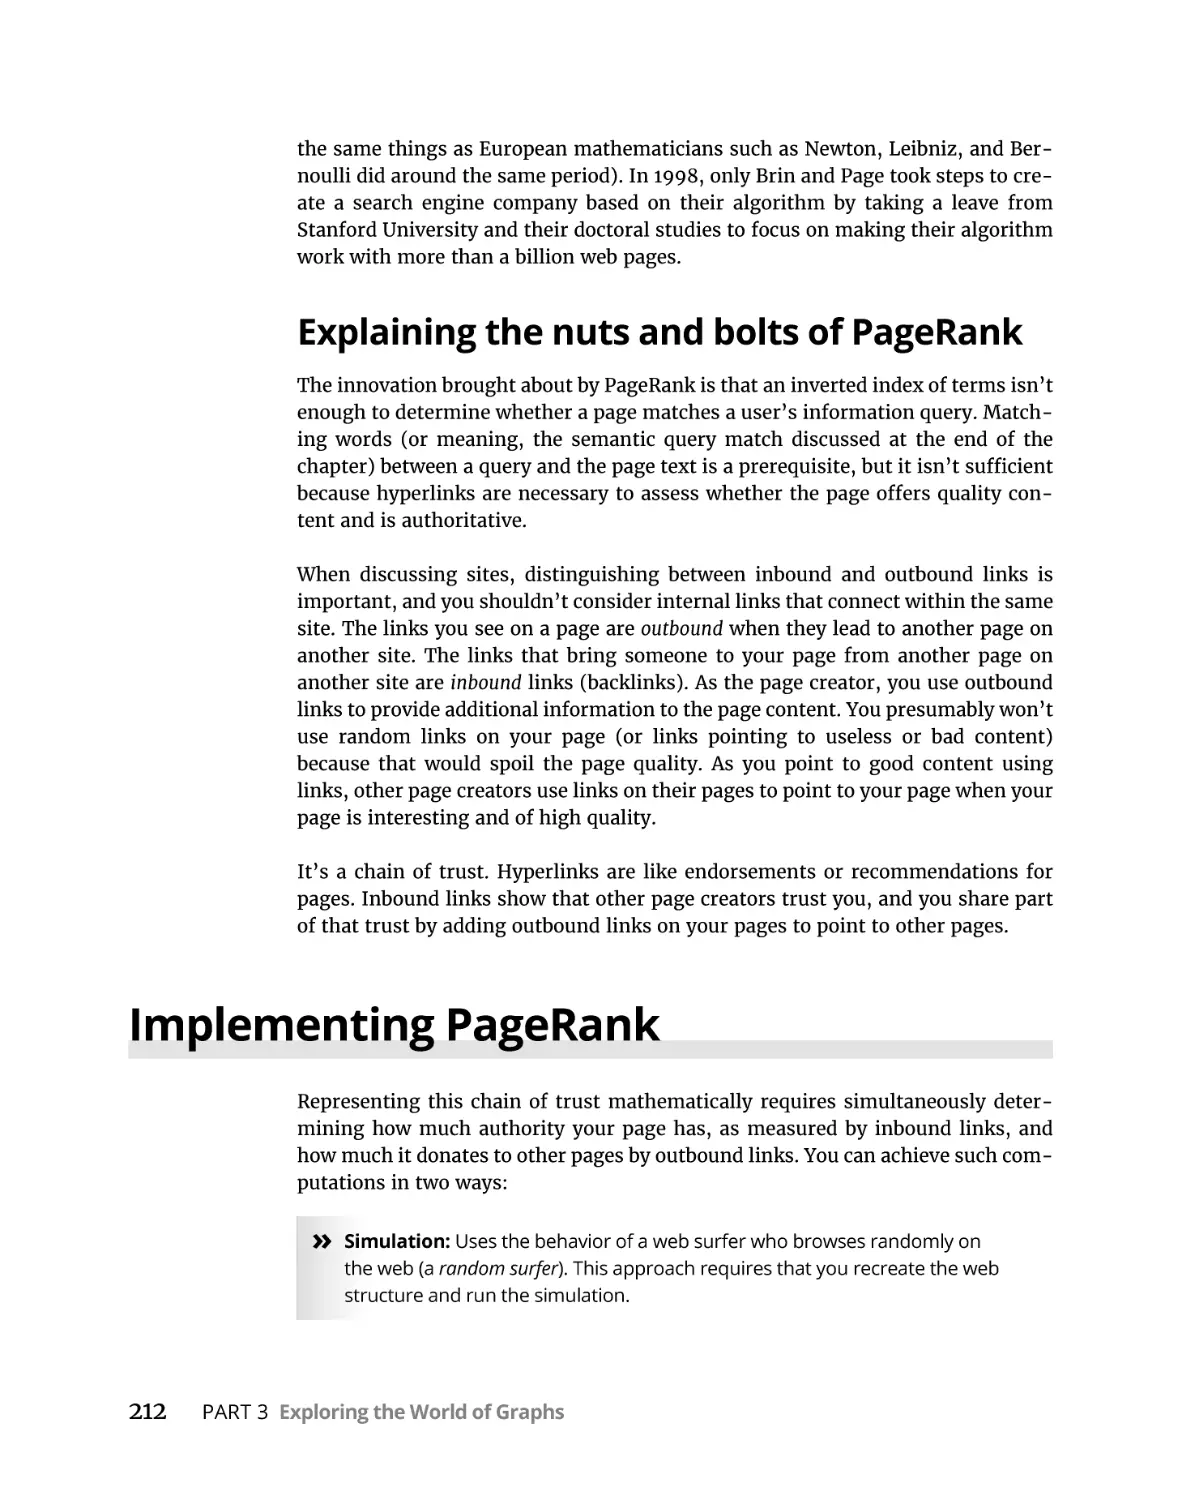 Explaining the nuts and bolts of PageRank
Implementing PageRank